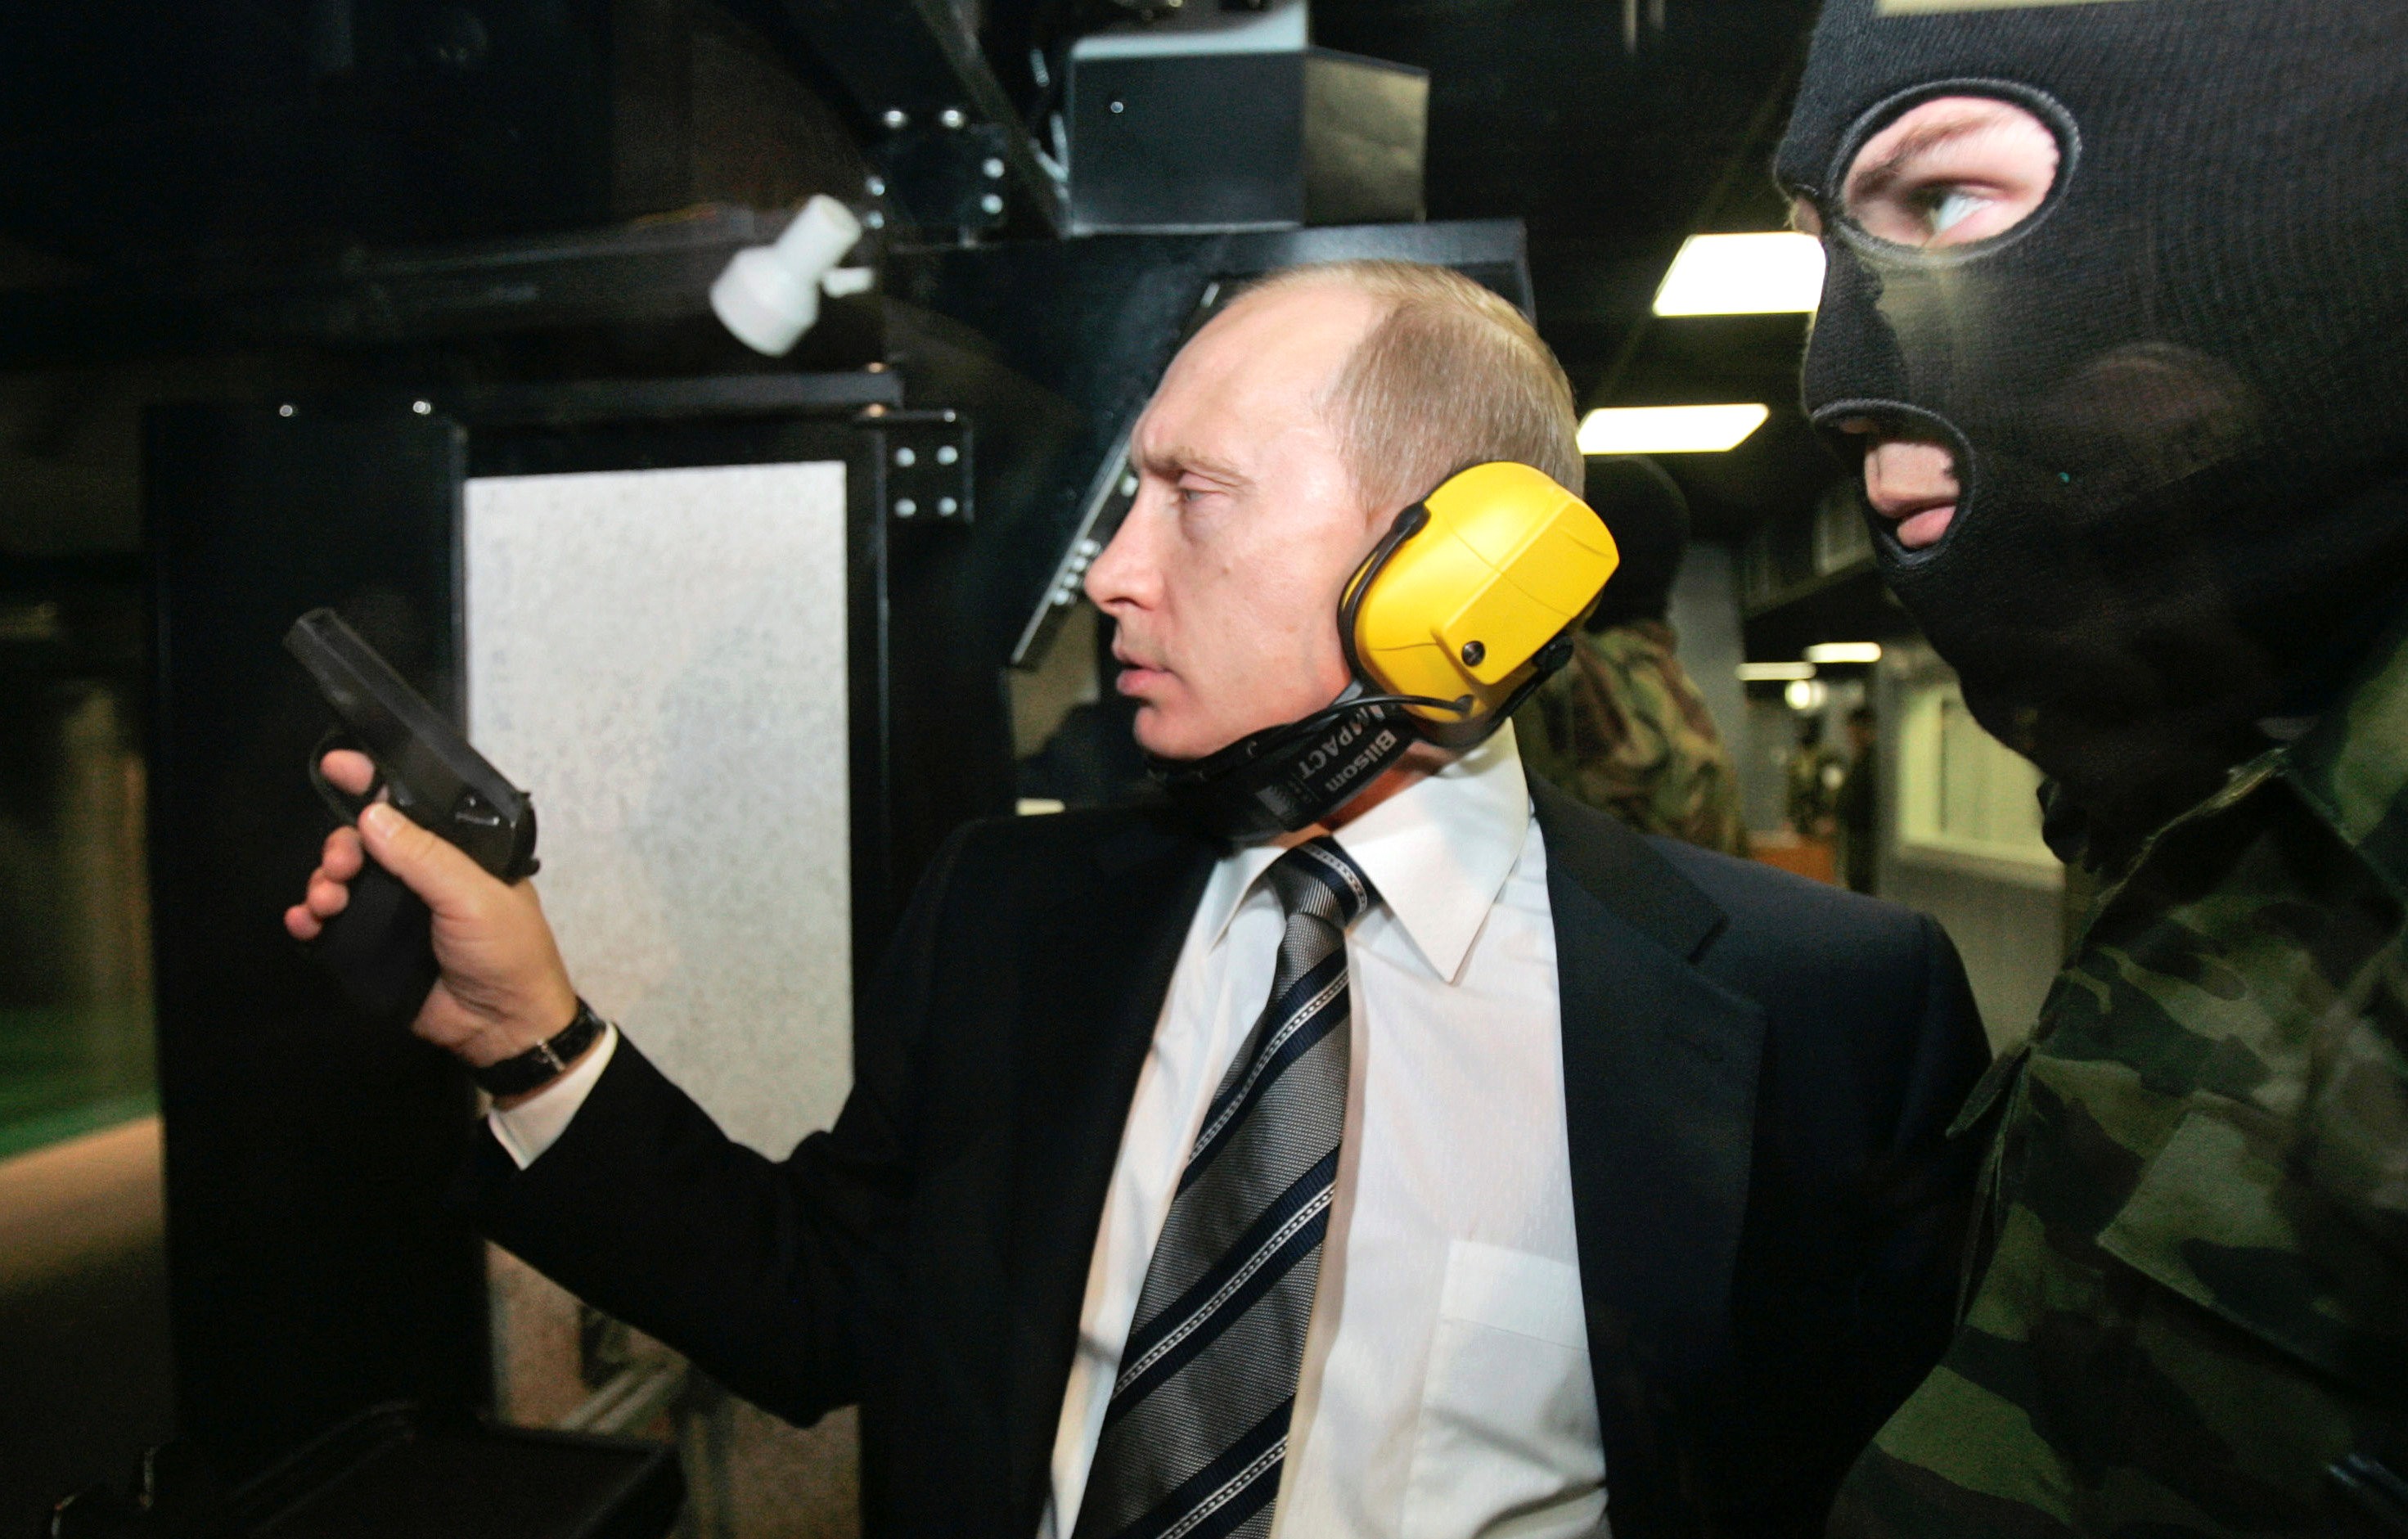 Russian President Vladimir Putin and a masked security officer at a shooting gallery in Moscow. Photo: Reuters